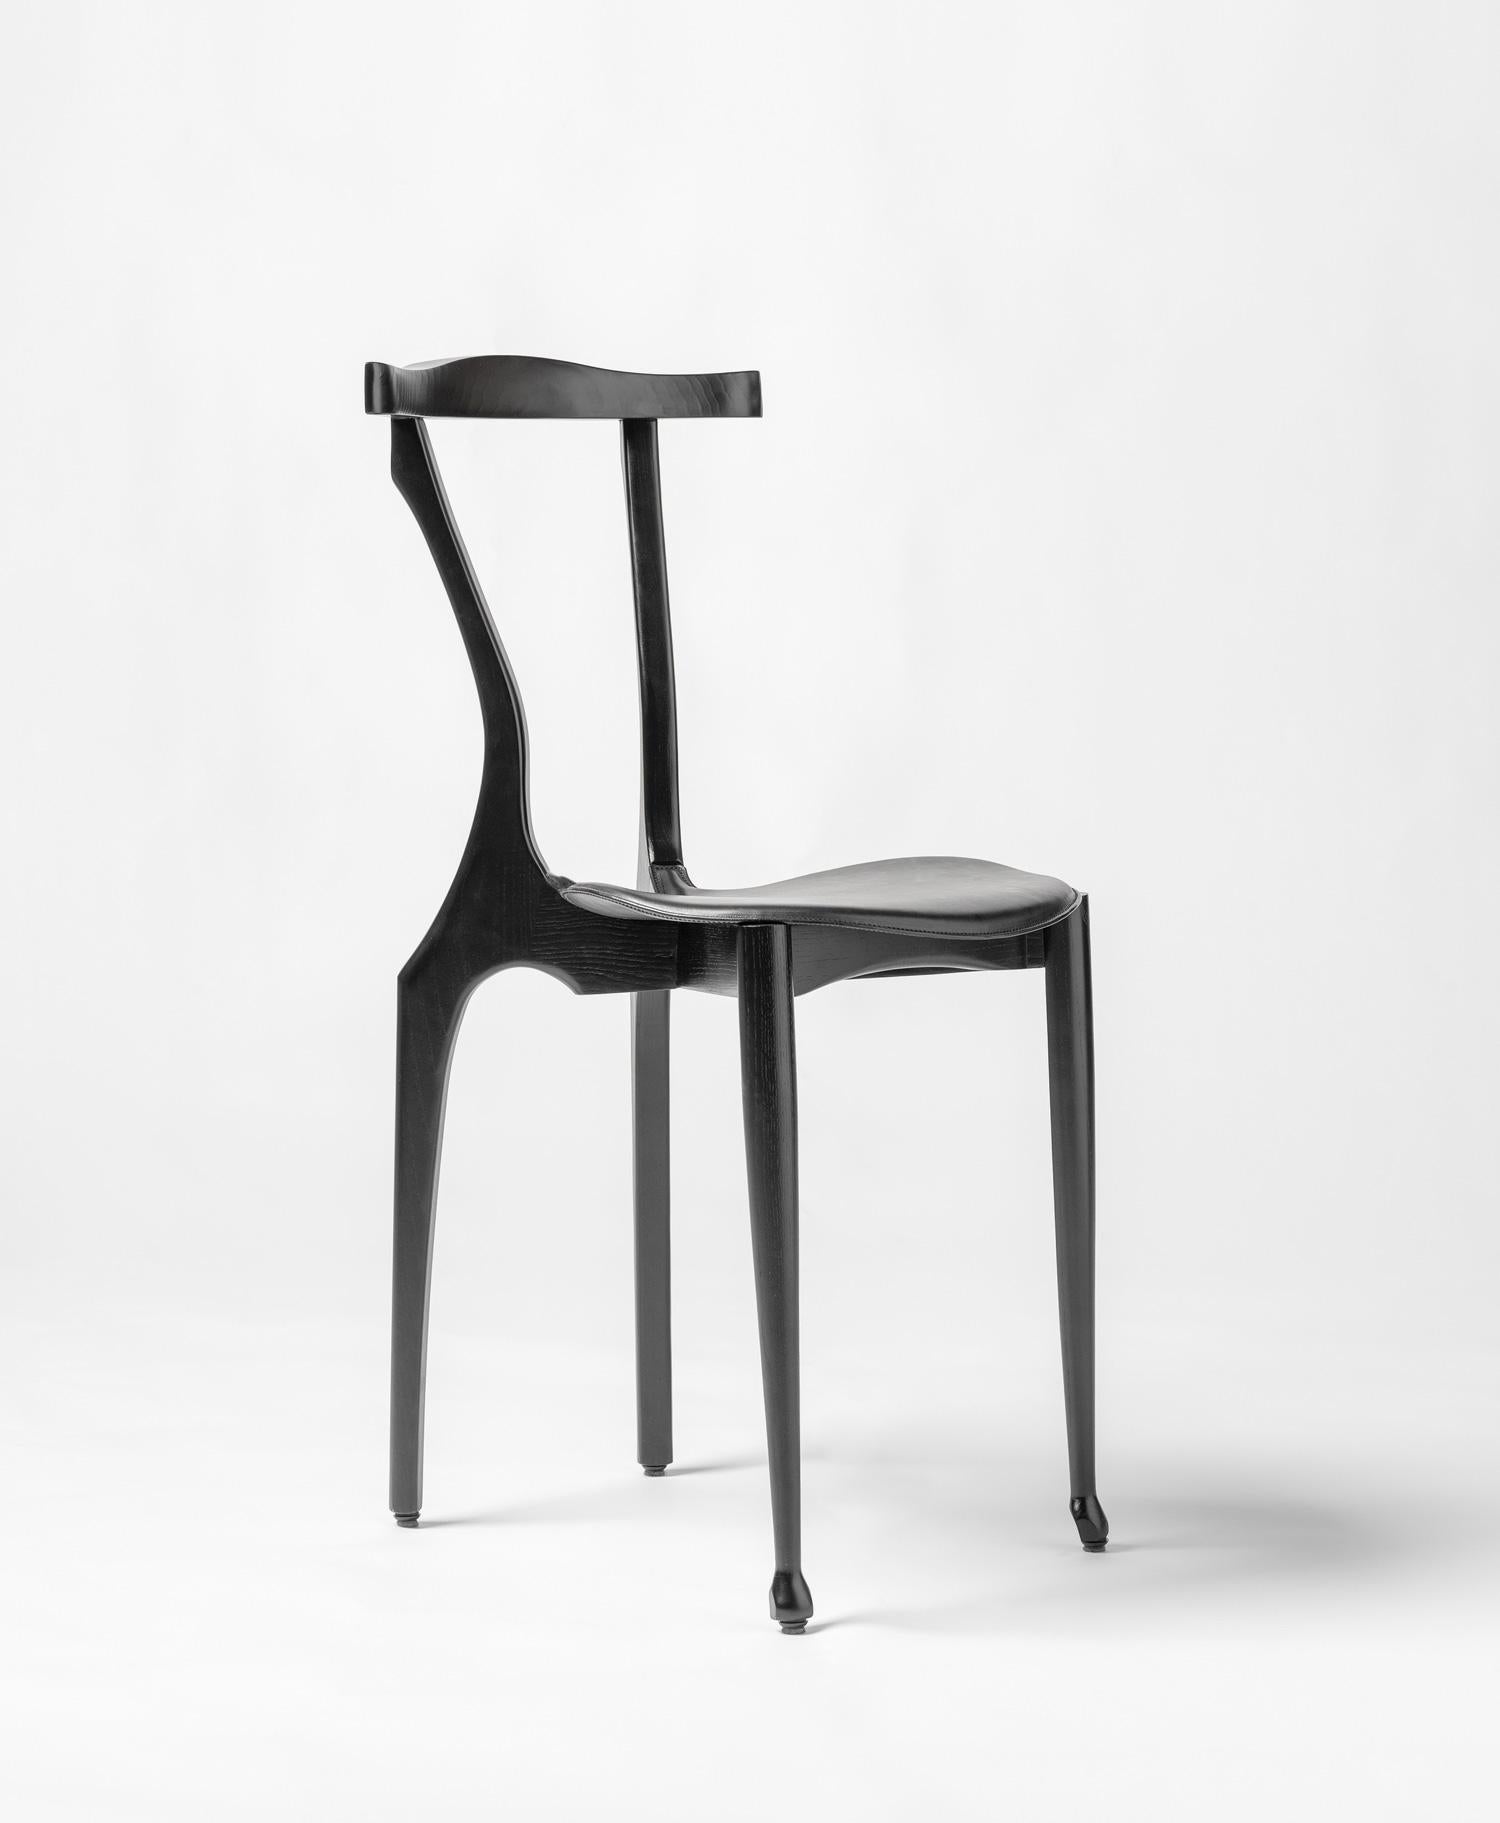 Hide Black Lacquered Contemporary Gaulinetta Dining Chair by Oscar Tusquets, Gaulino  For Sale